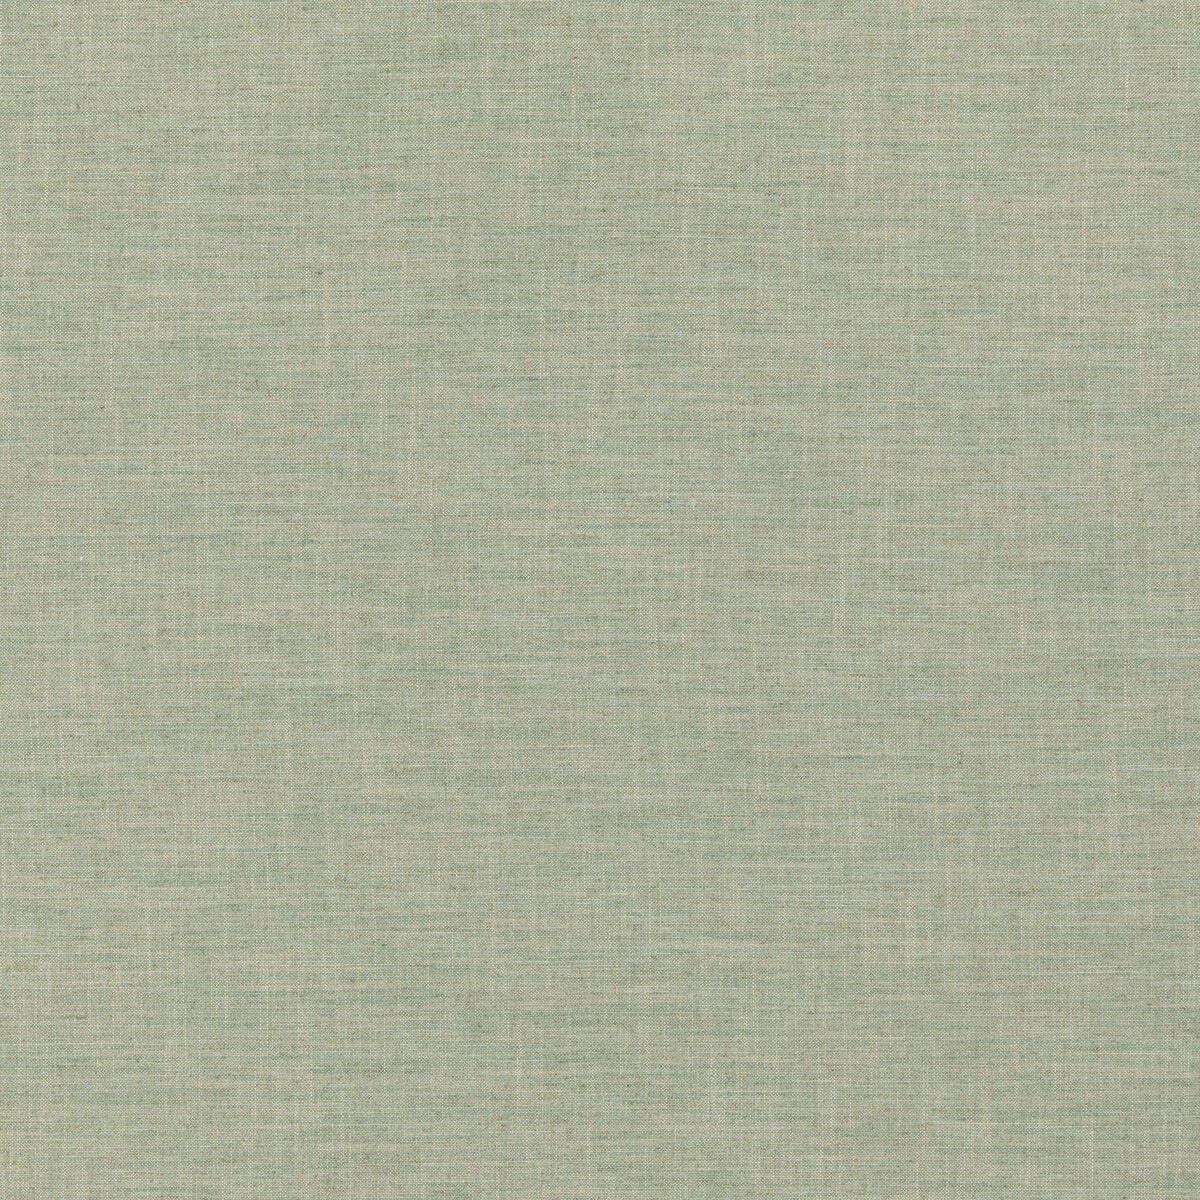 Quinton fabric in verdigris color - pattern BF10887.774.0 - by G P &amp; J Baker in the Essential Colours II collection